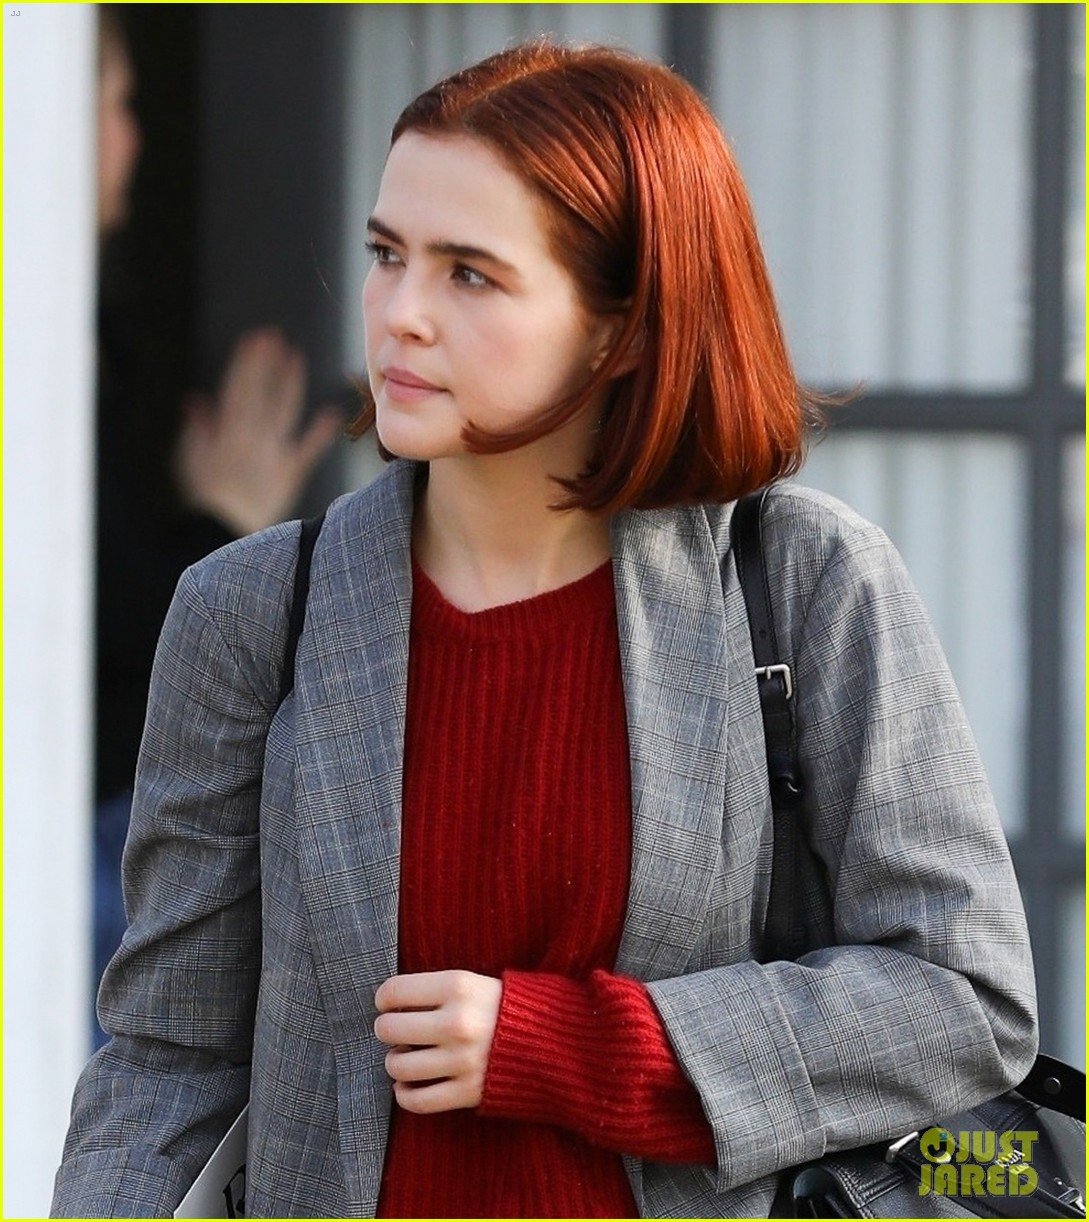 zoey deutch steps out with new red bob haircut 06